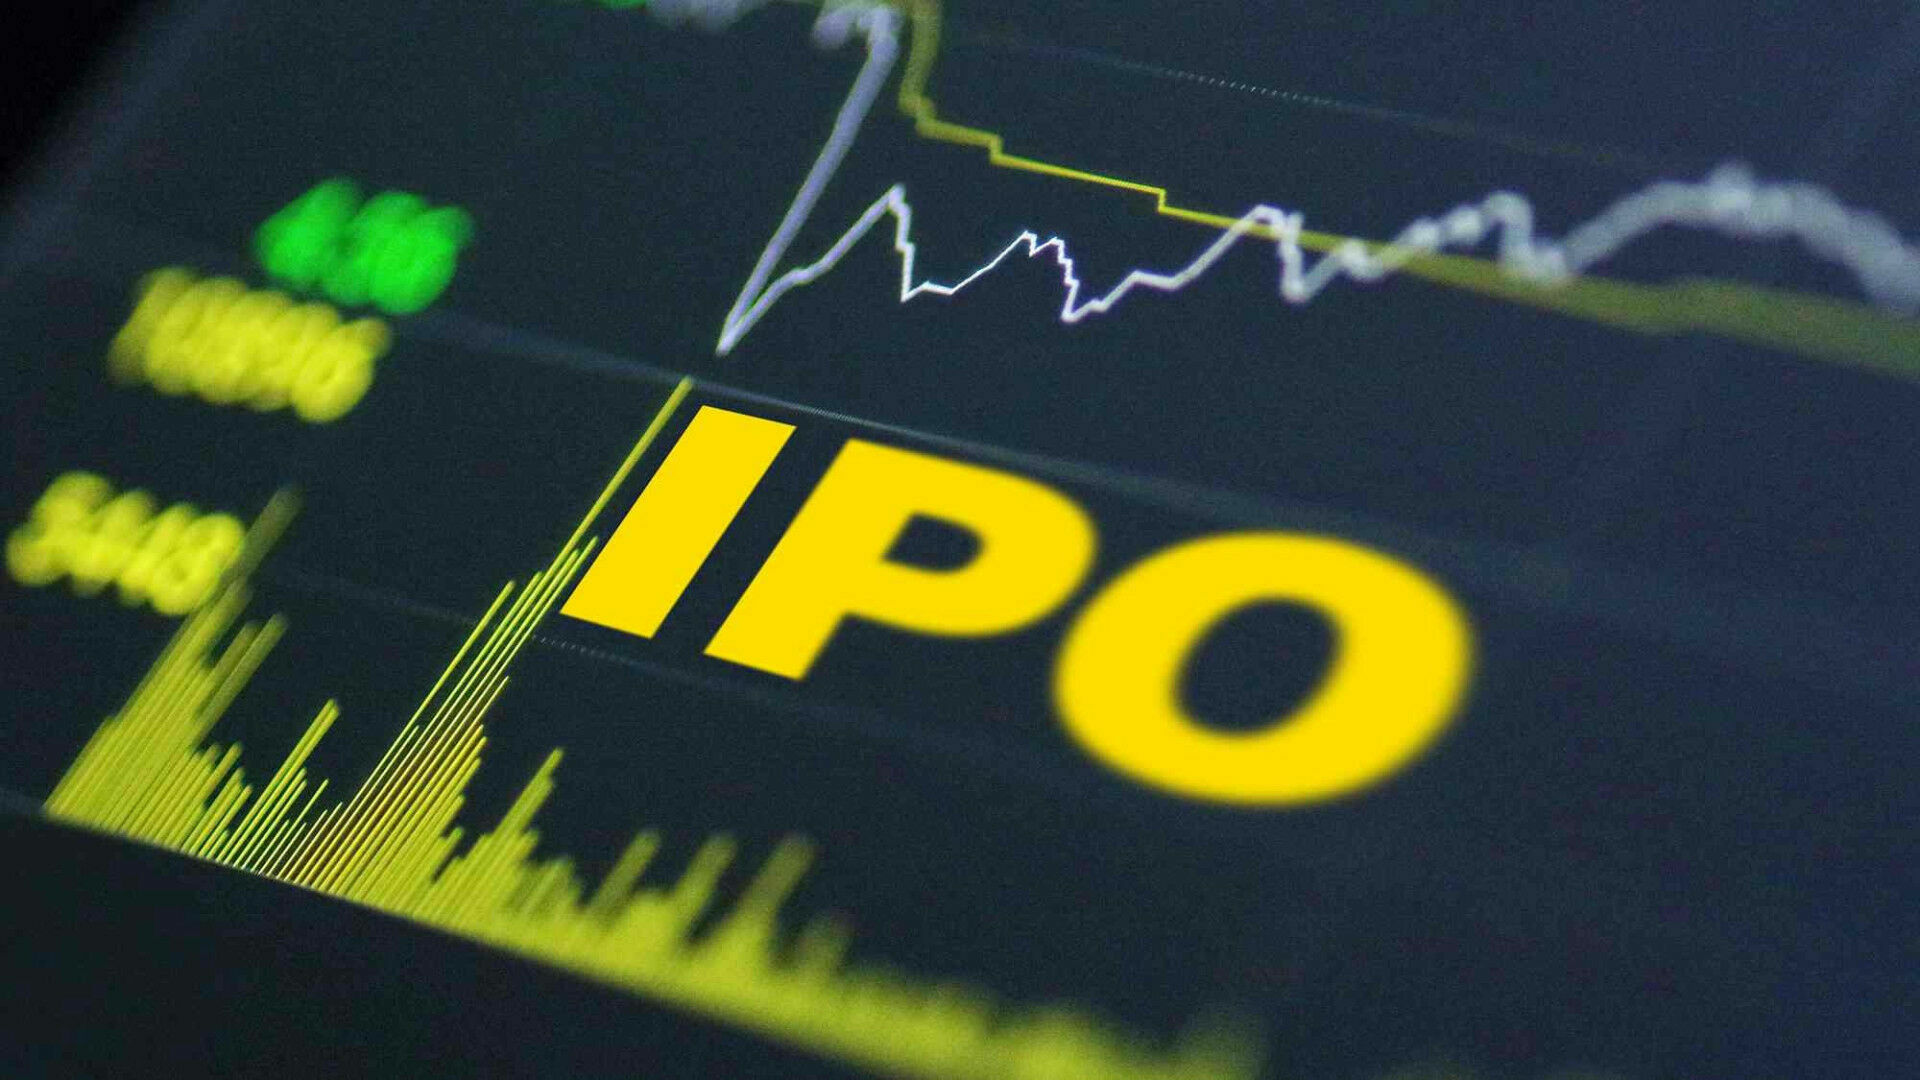 The volume of funds raised through IPOs on the US and European stock exchanges collapsed by 90%